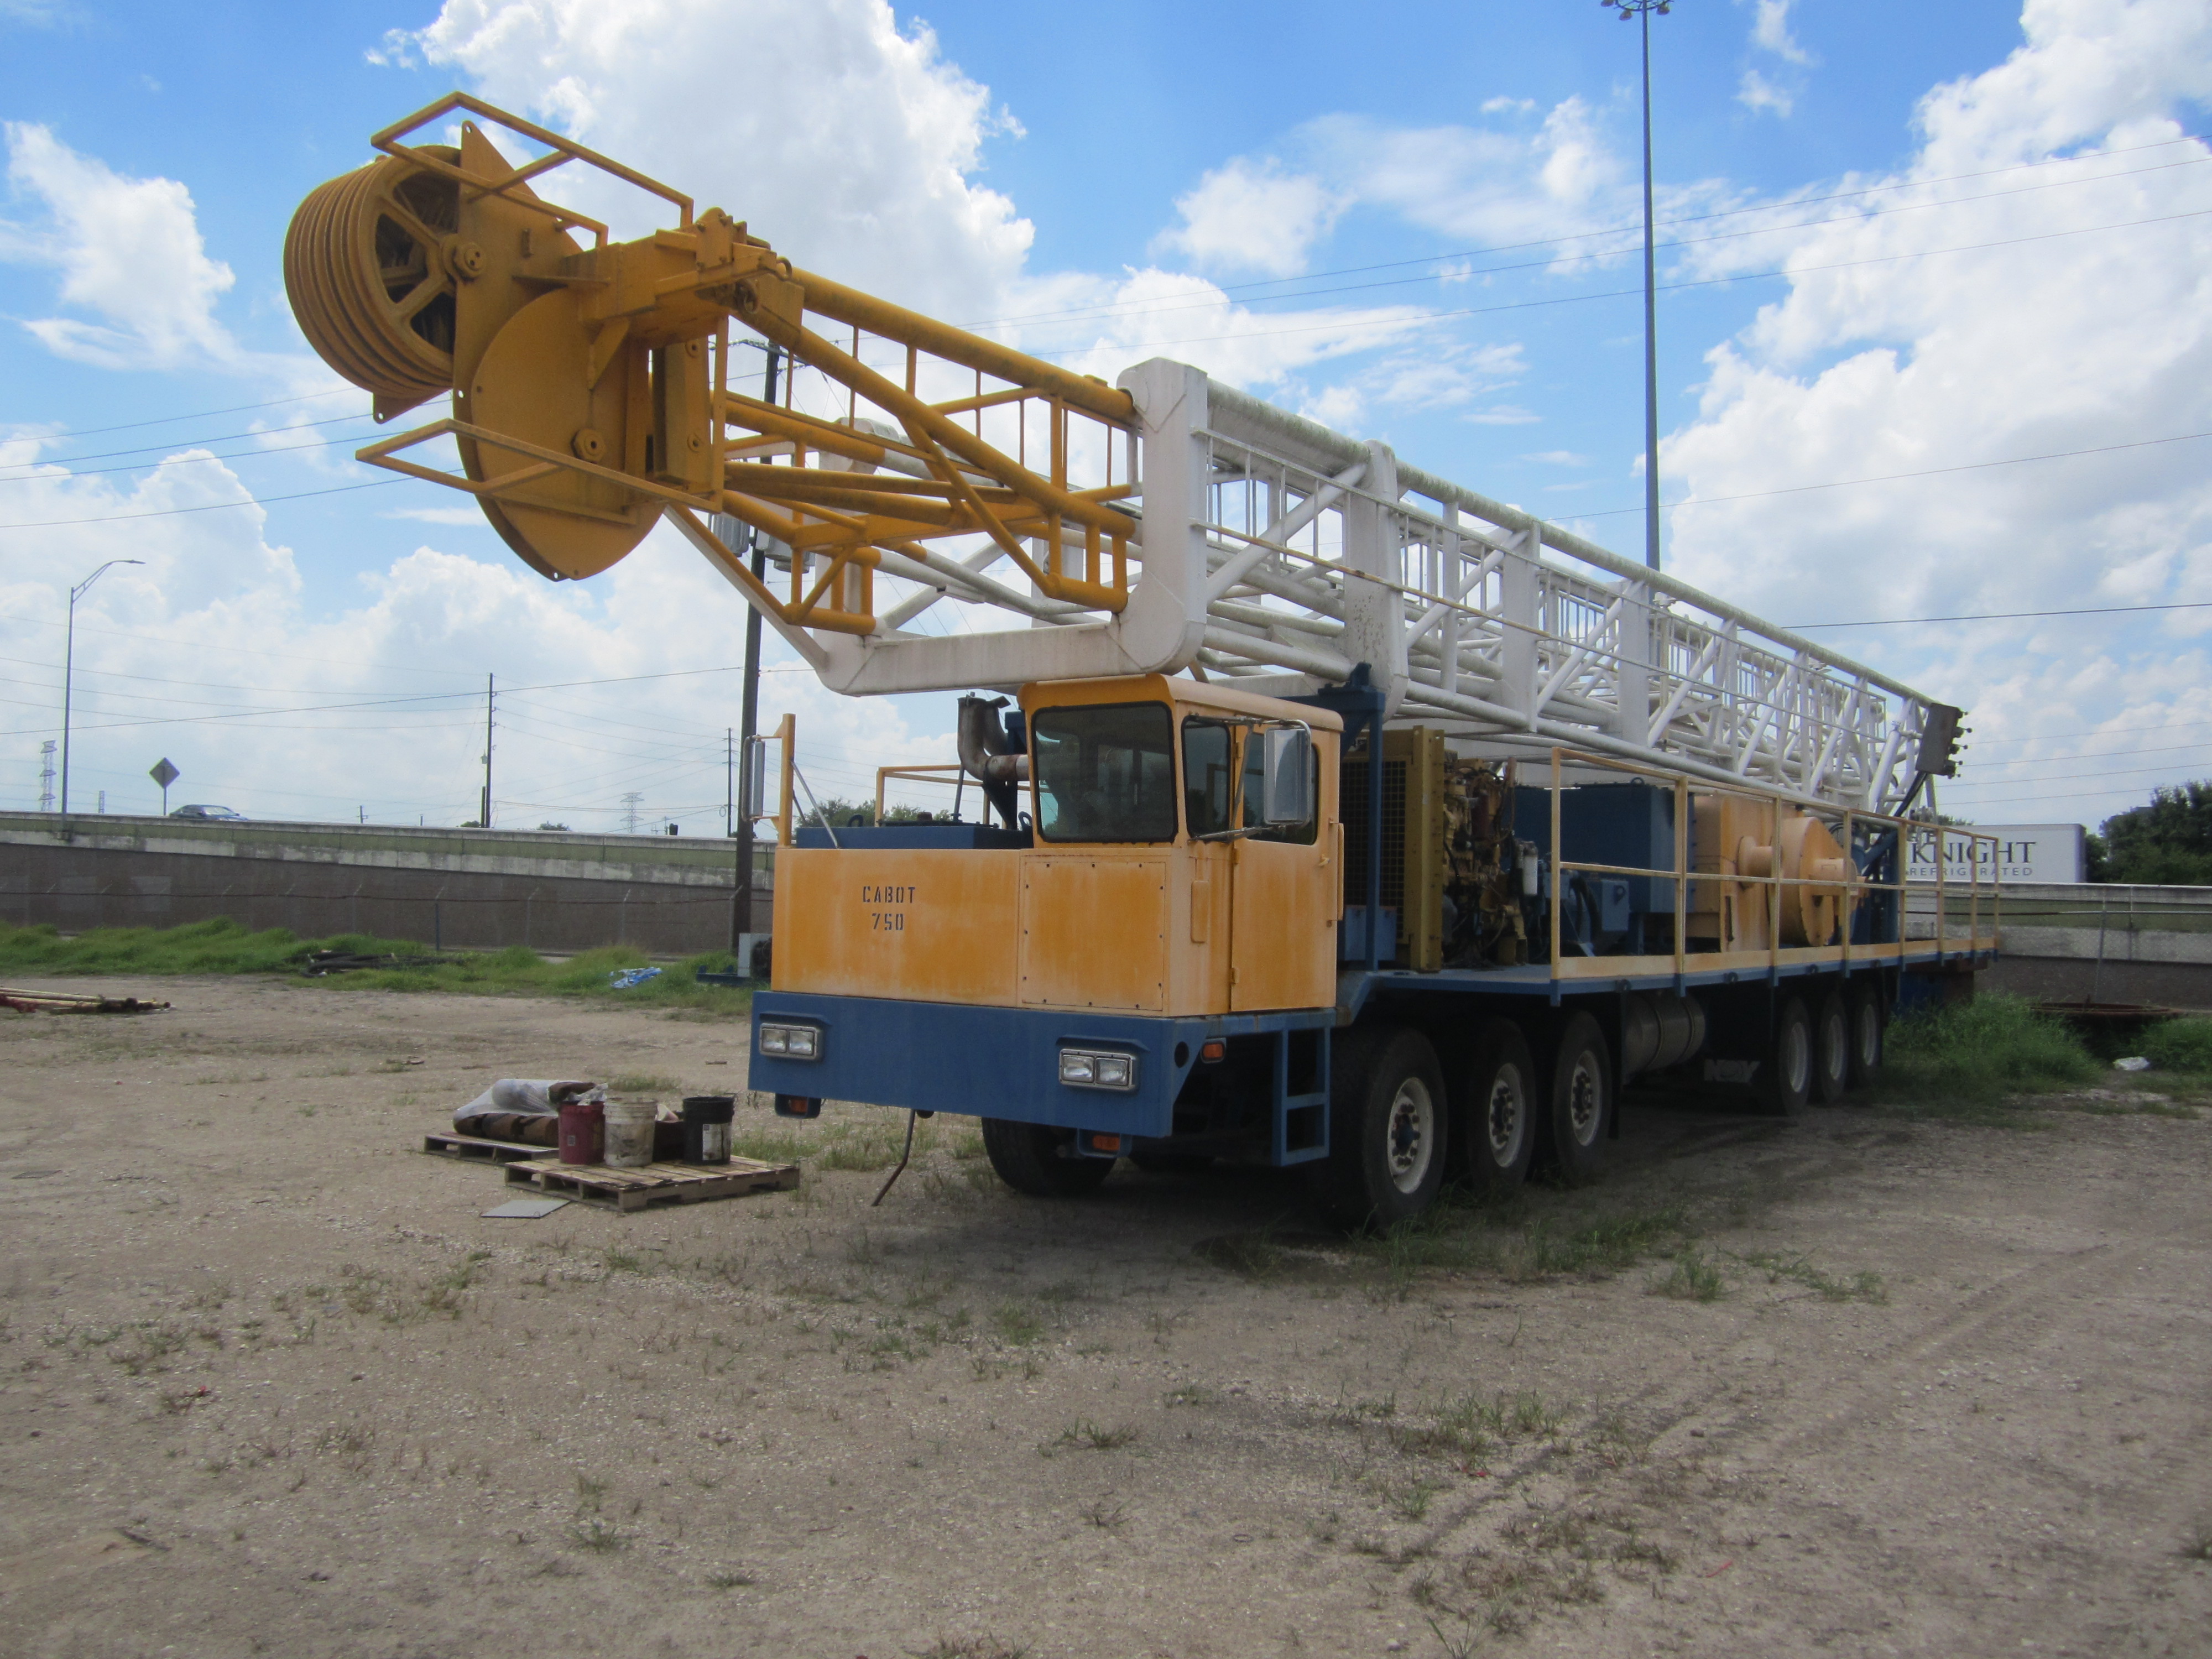 CABOT 750 Drilling Rig - Available Drilling Equipment